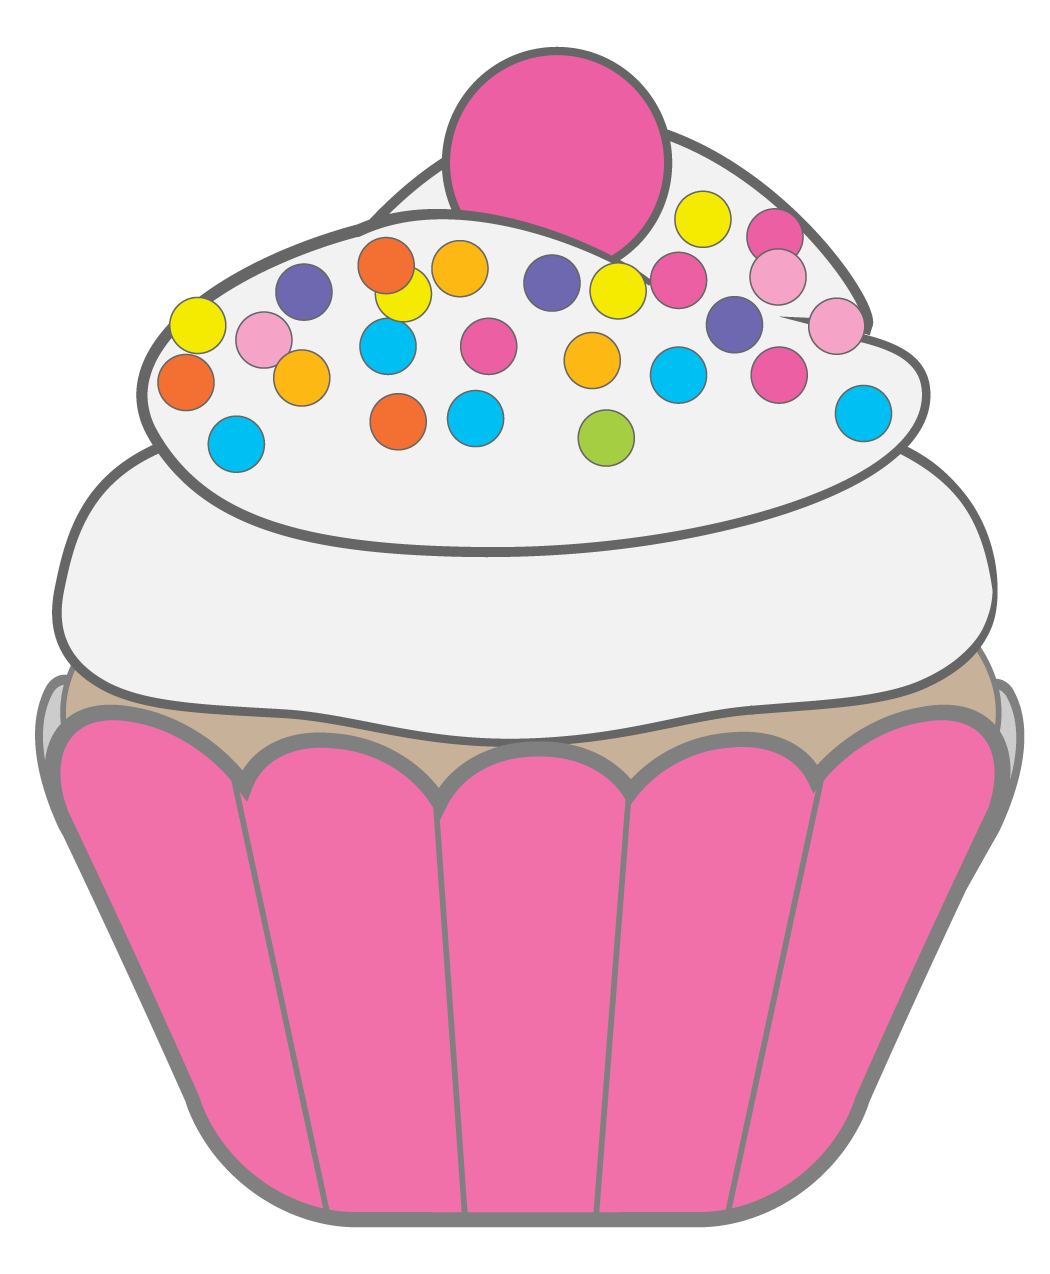 clipart of cake - photo #16